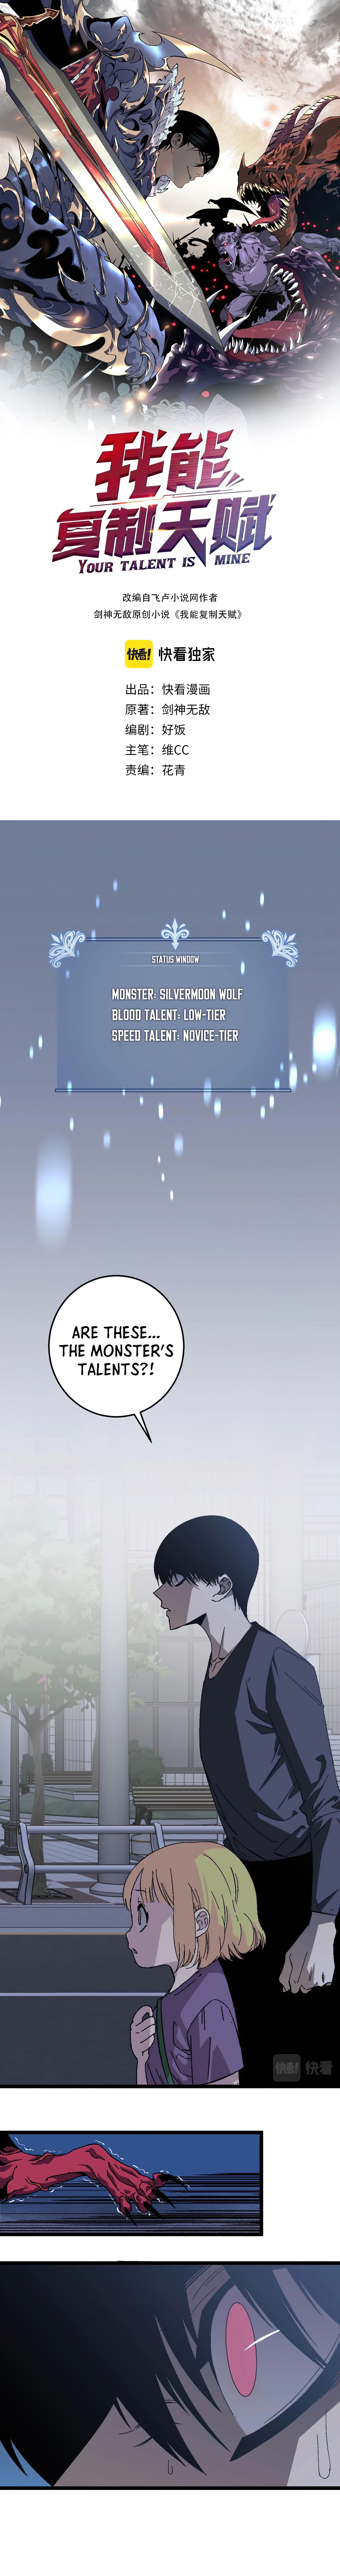 Your Talent is Mine 68, Your Talent is Mine 68, Read Your Talent is Mine 68, Your Talent is Mine 68 Manga, Your Talent is Mine 68 english, Your Talent is Mine 68 raw manga, Your Talent is Mine 68 online, Your Talent is Mine 68 high quality, Your Talent is Mine 68 chapter, Your Talent is Mine 68 manga scan